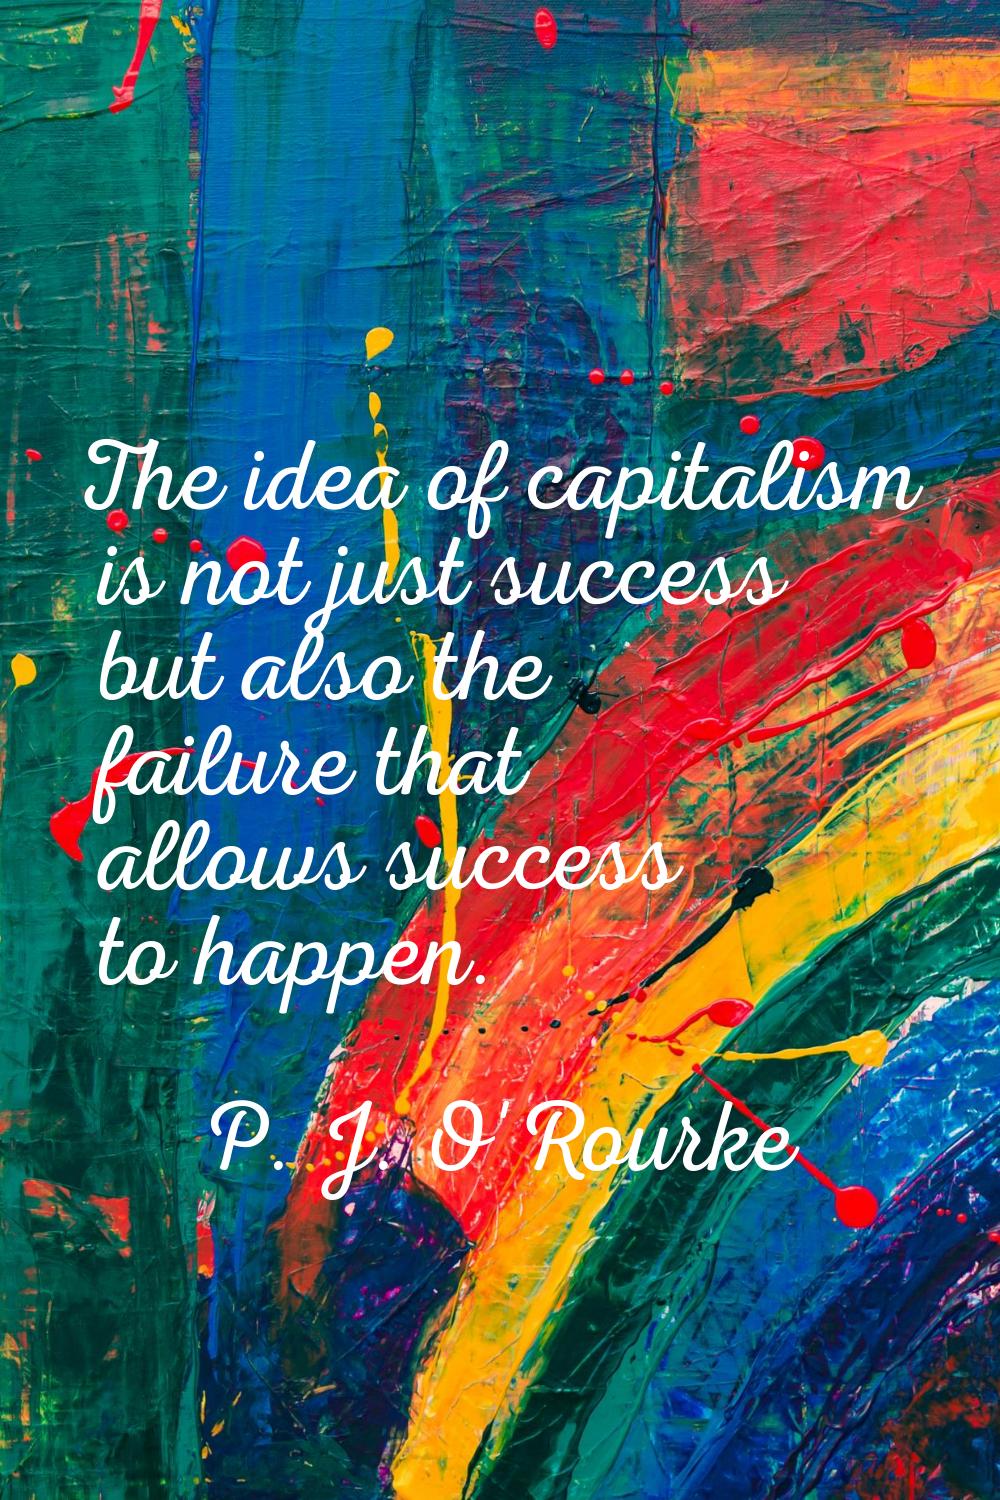 The idea of capitalism is not just success but also the failure that allows success to happen.